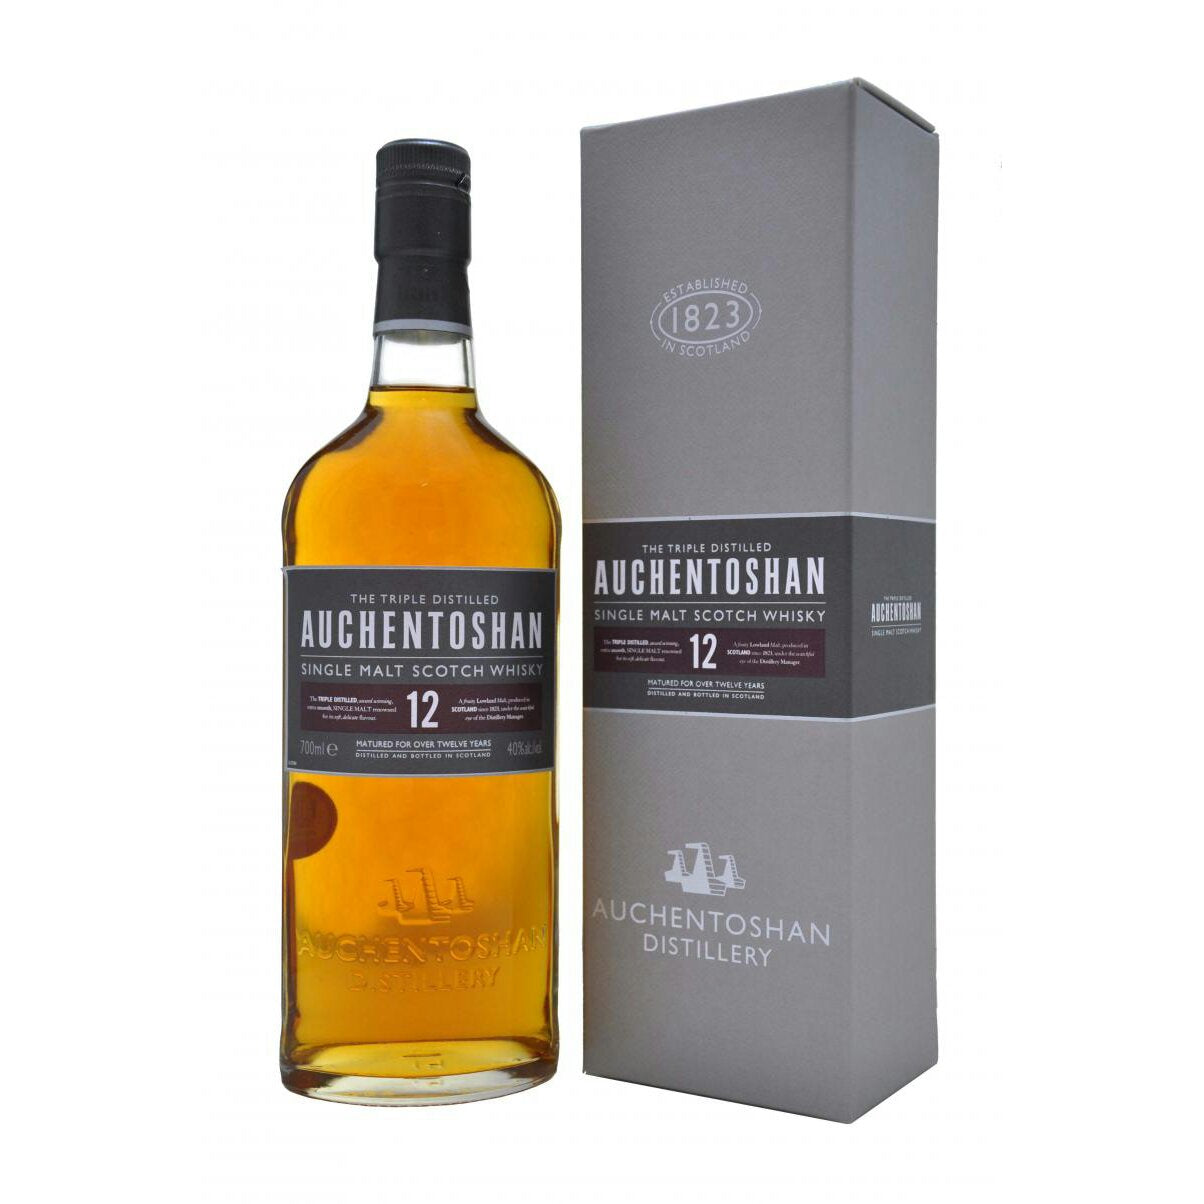 Collective – Auchentoshan Whisky Guild 12 Old Years Scotch Malt The Single